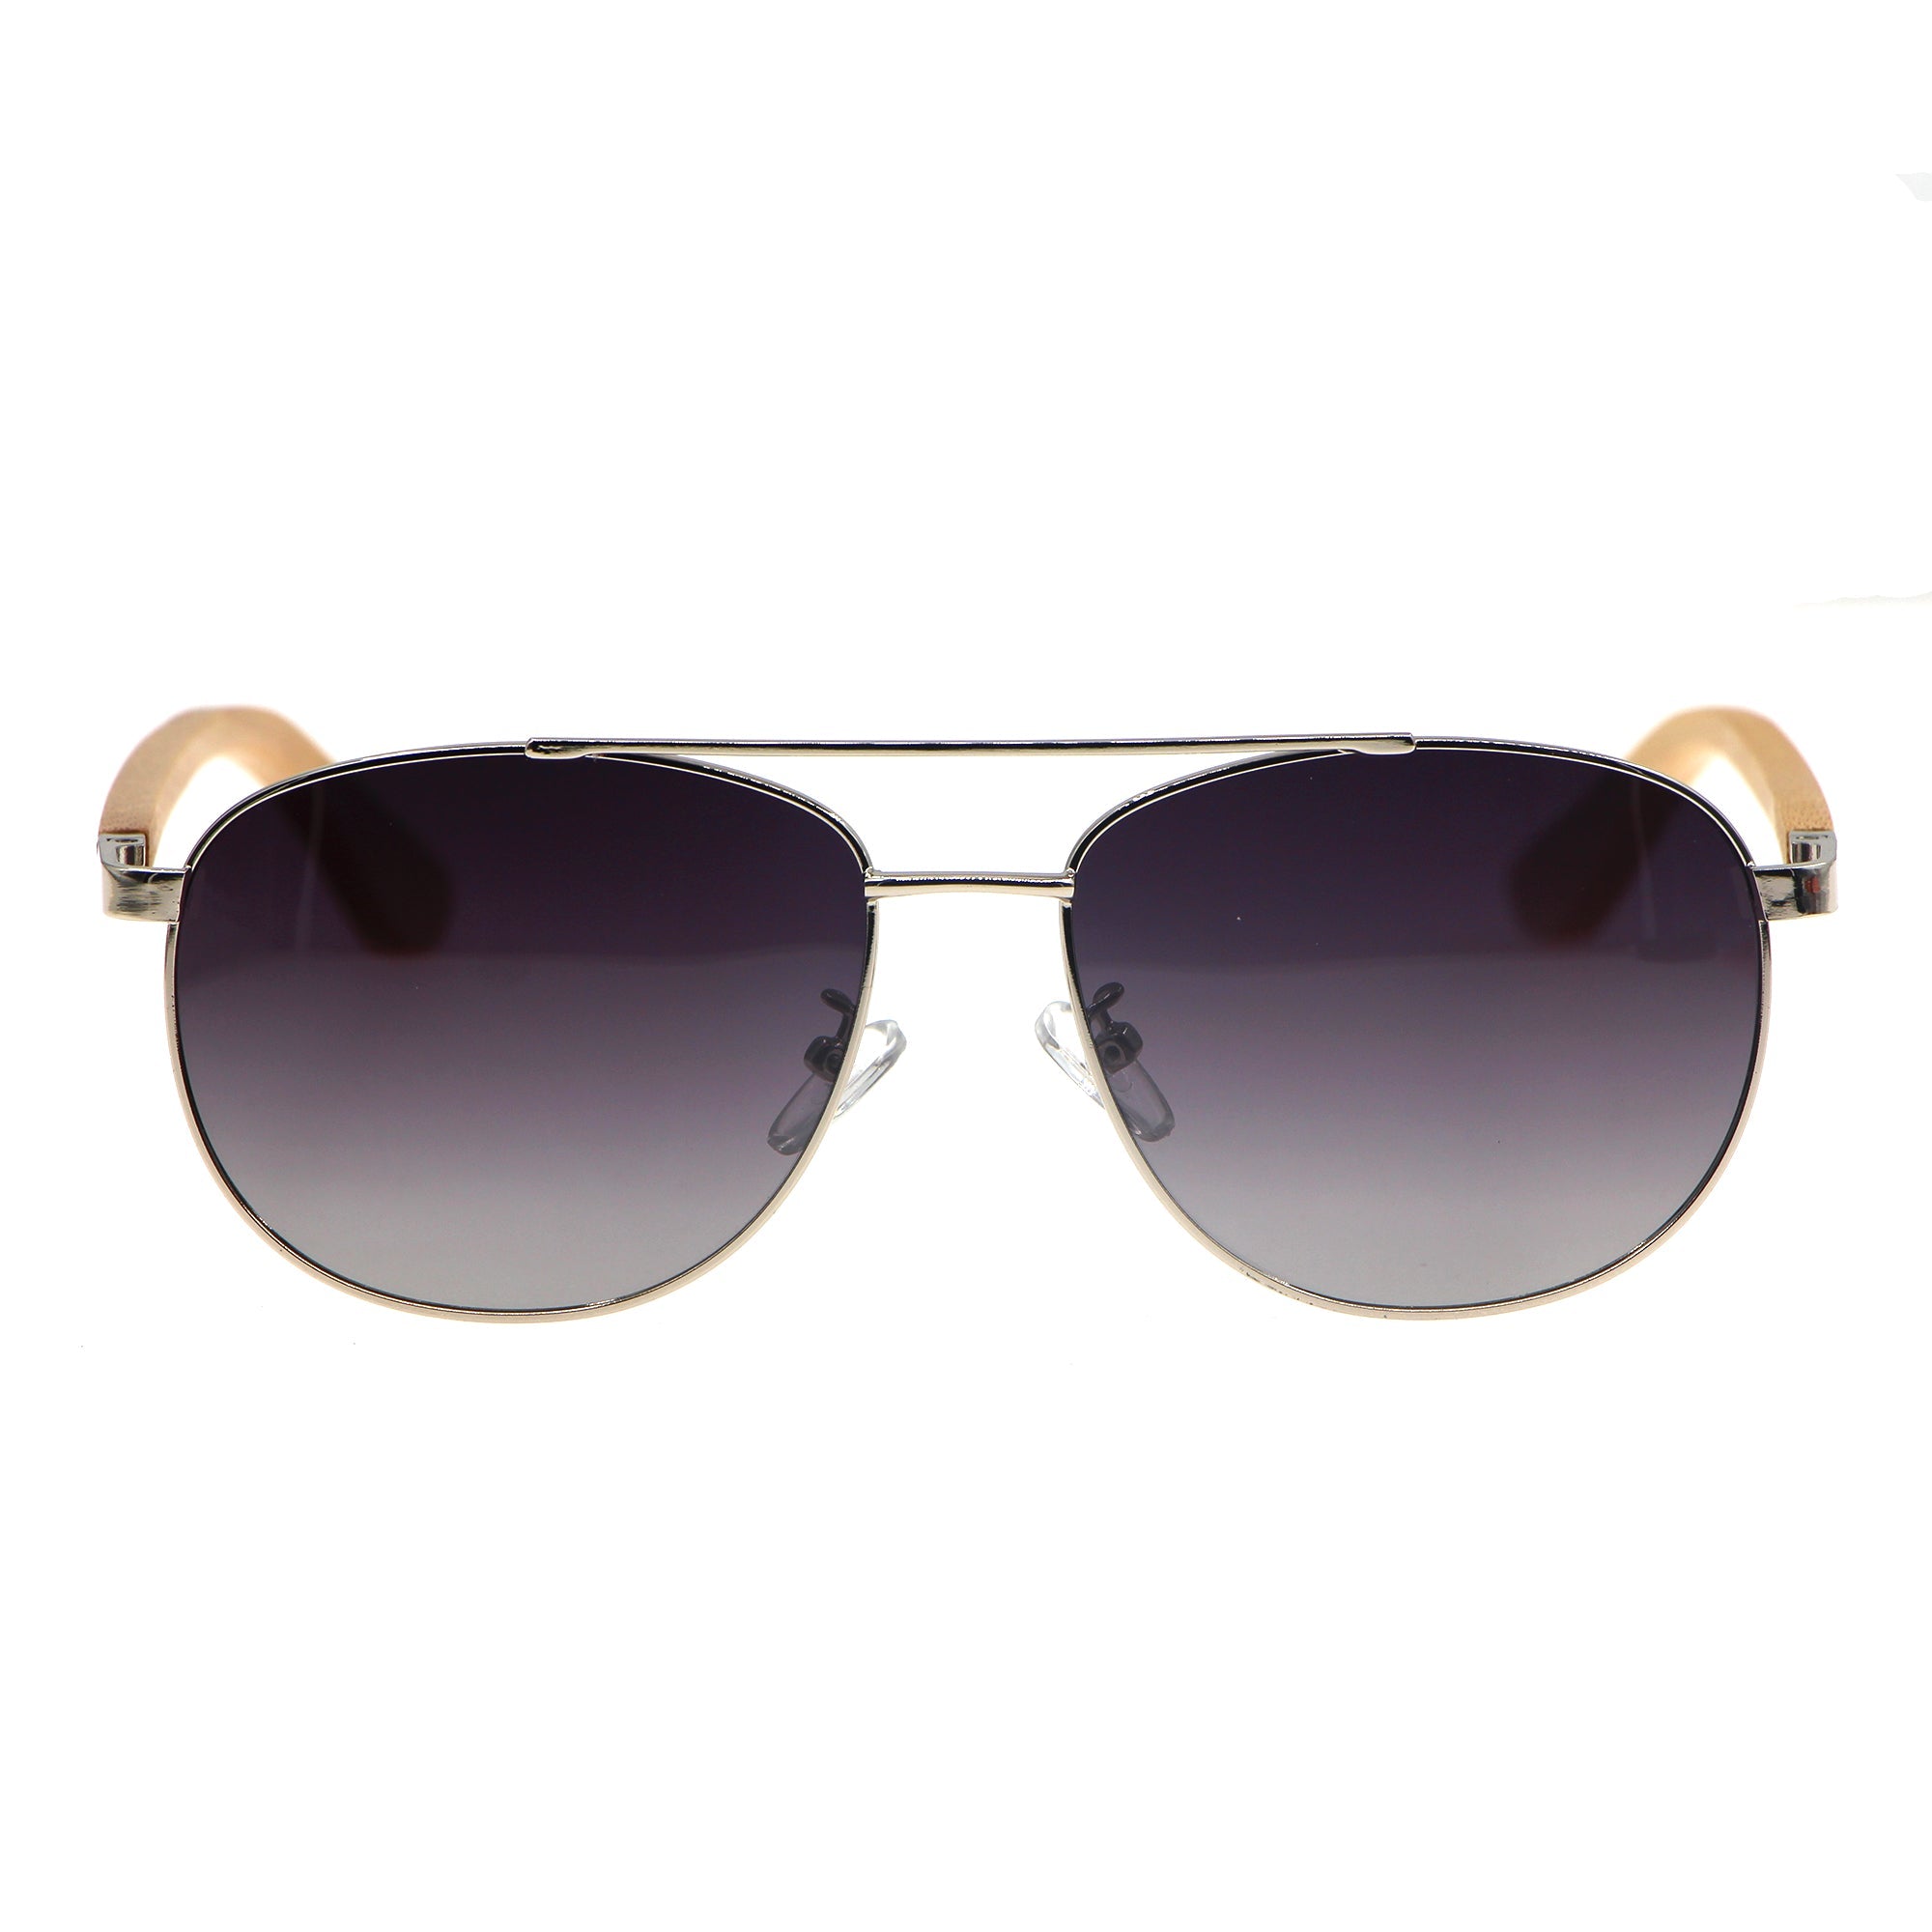 Dilicn FREE GIFT Polarized Metal Bamboo Sunglasses